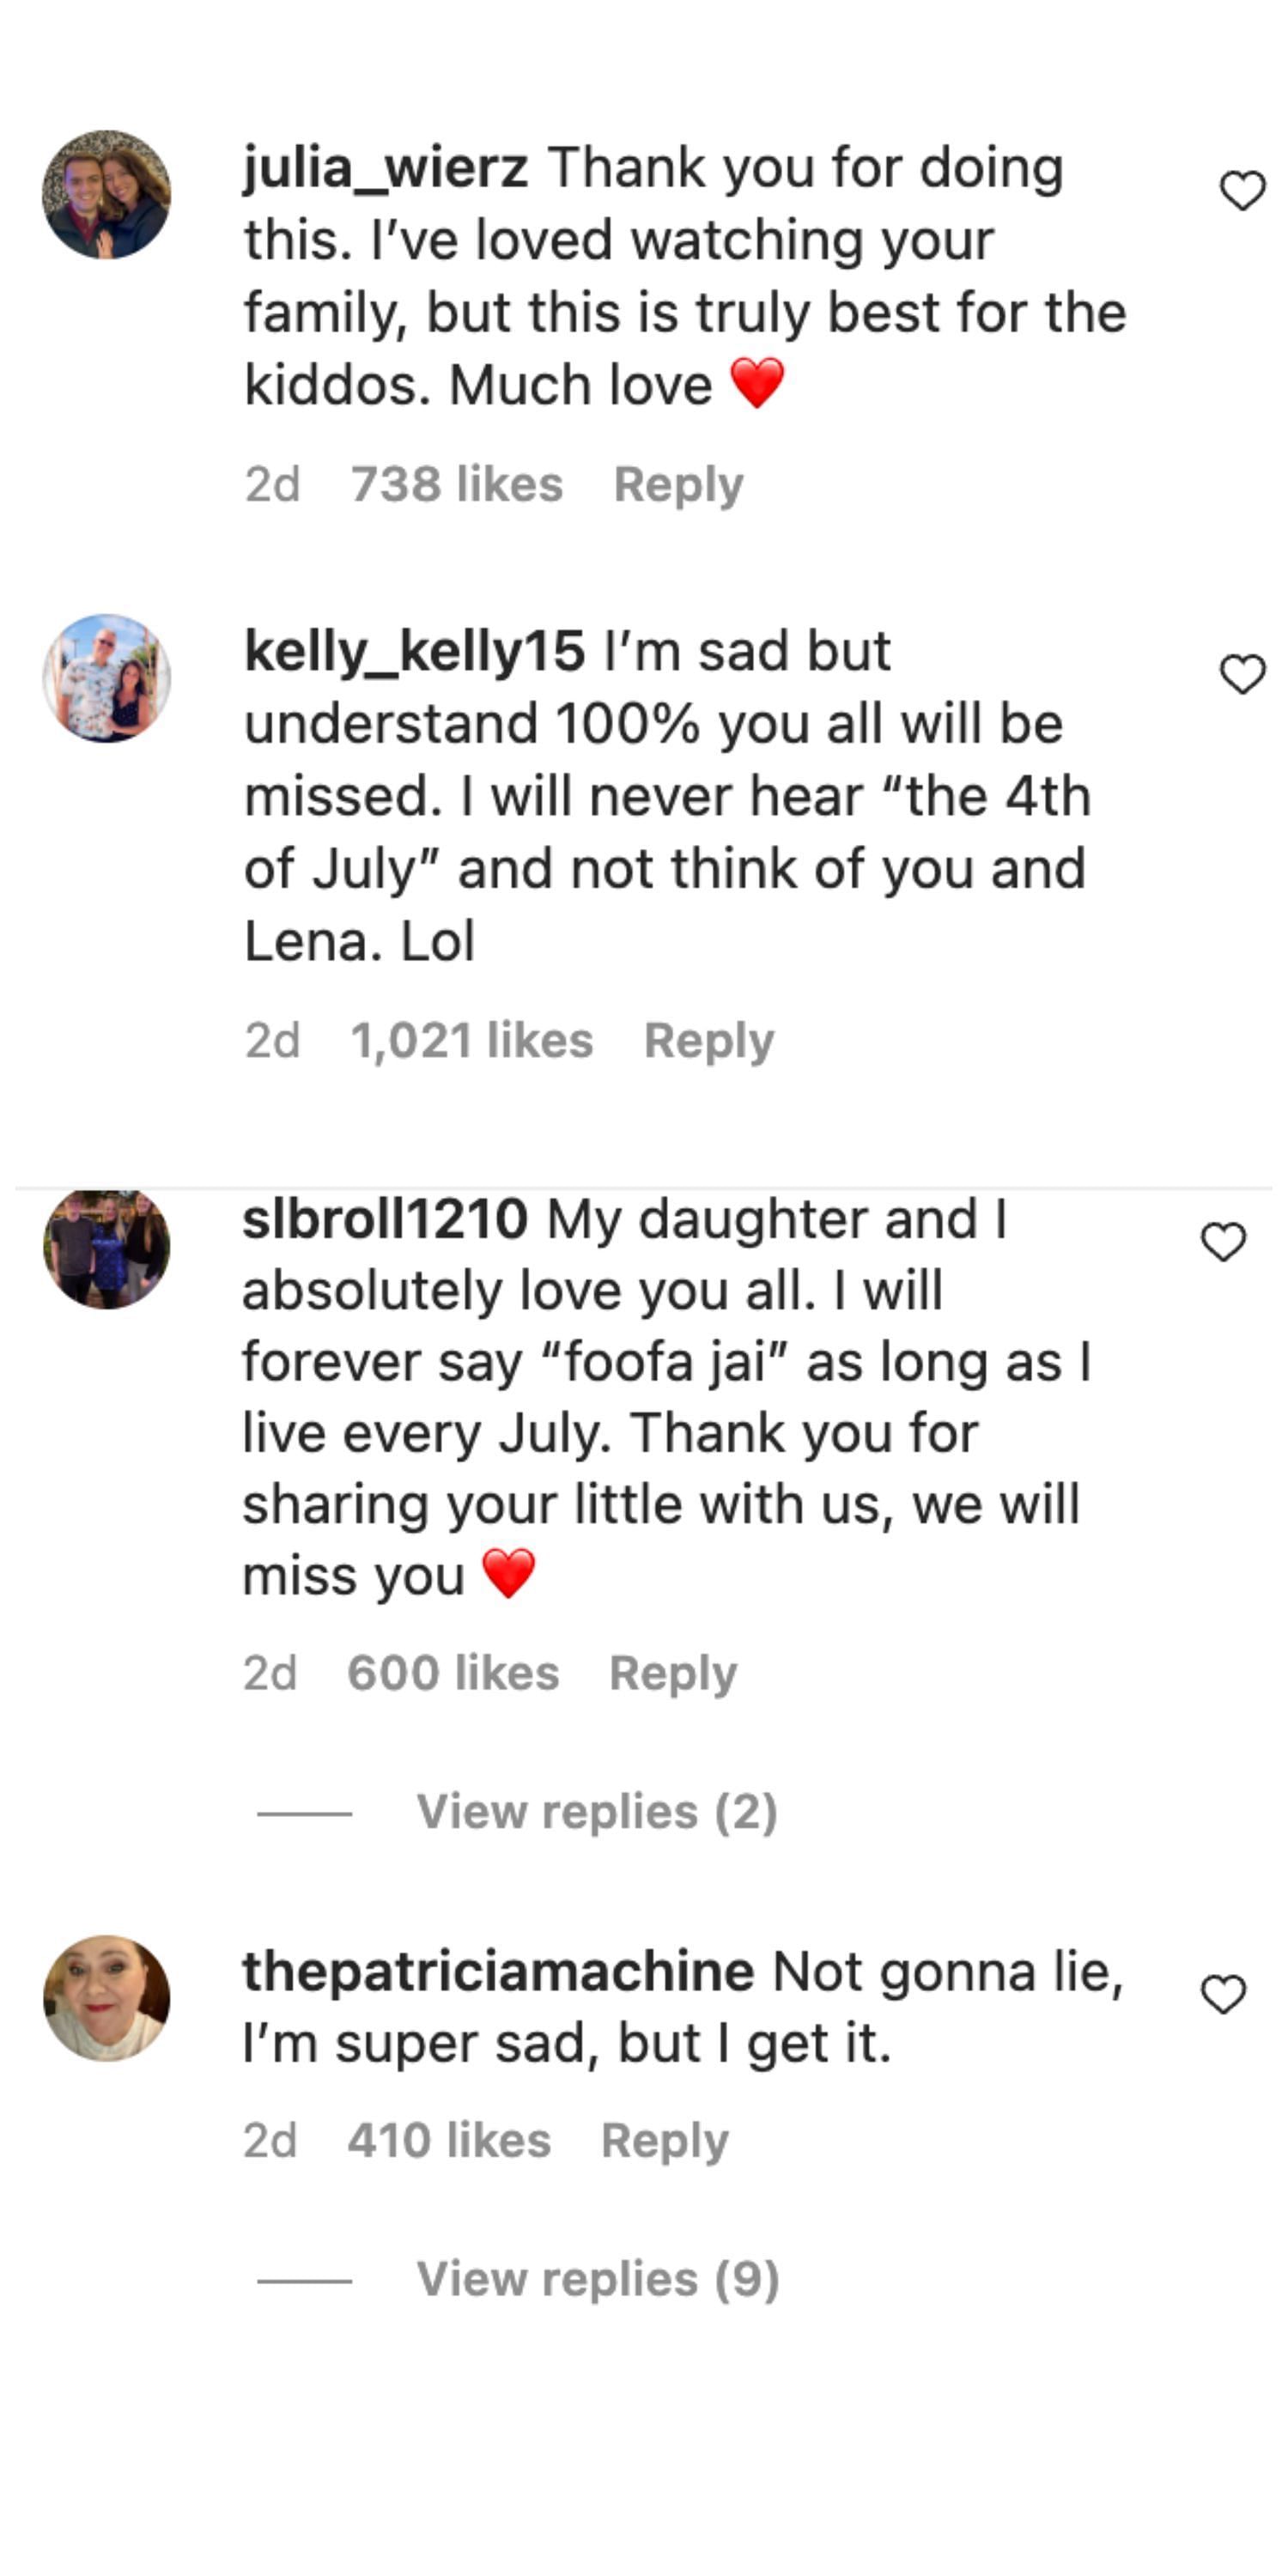 Social media users reacted to Laura quitting TikTok so that her kids can have a &quot;normal childhood.&quot; (Image via Instagram)